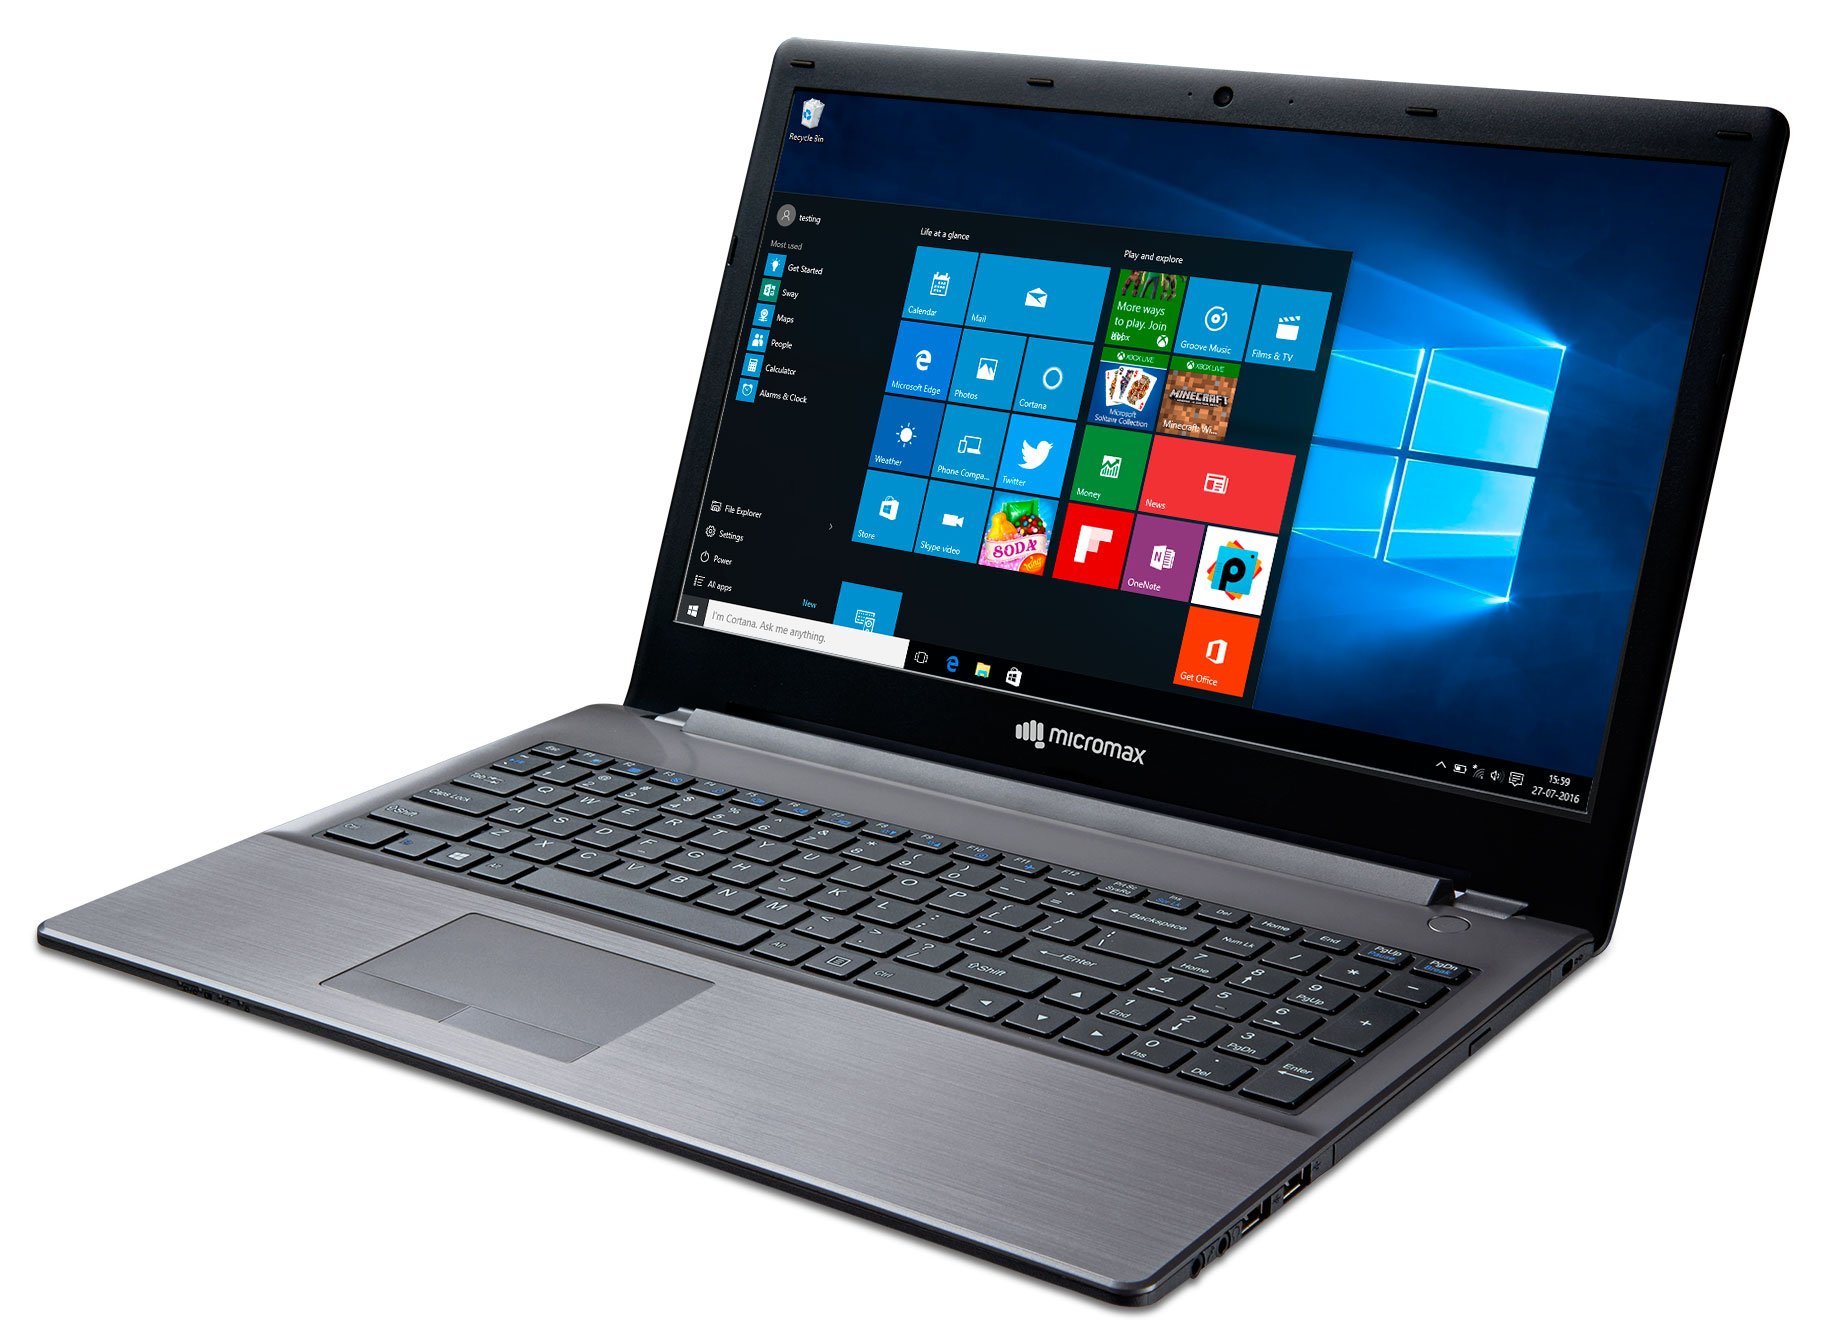 Micromax announces new 15-inch Windows 10 Laptop starting at Rs.26,990